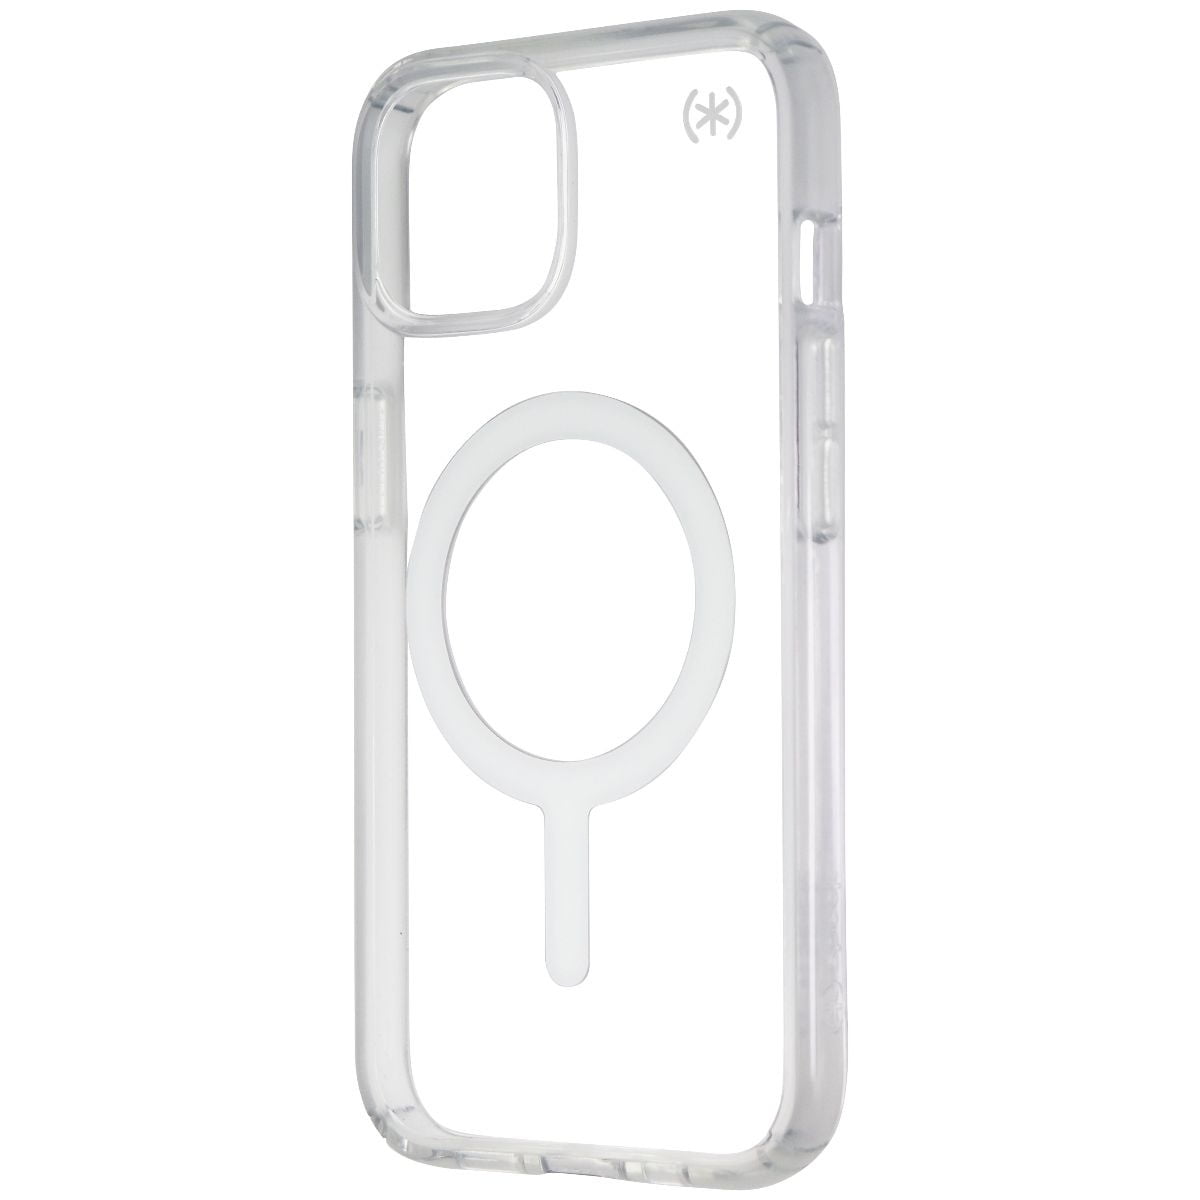  Speck iPhone 13 Pro Max Case - Drop Protection Fits iPhone 12  Pro Max & iPhone 13 Pro Max Phones - Clear Case, Built for MagSafe -  Anti-Yellowing & Anti-Fade with